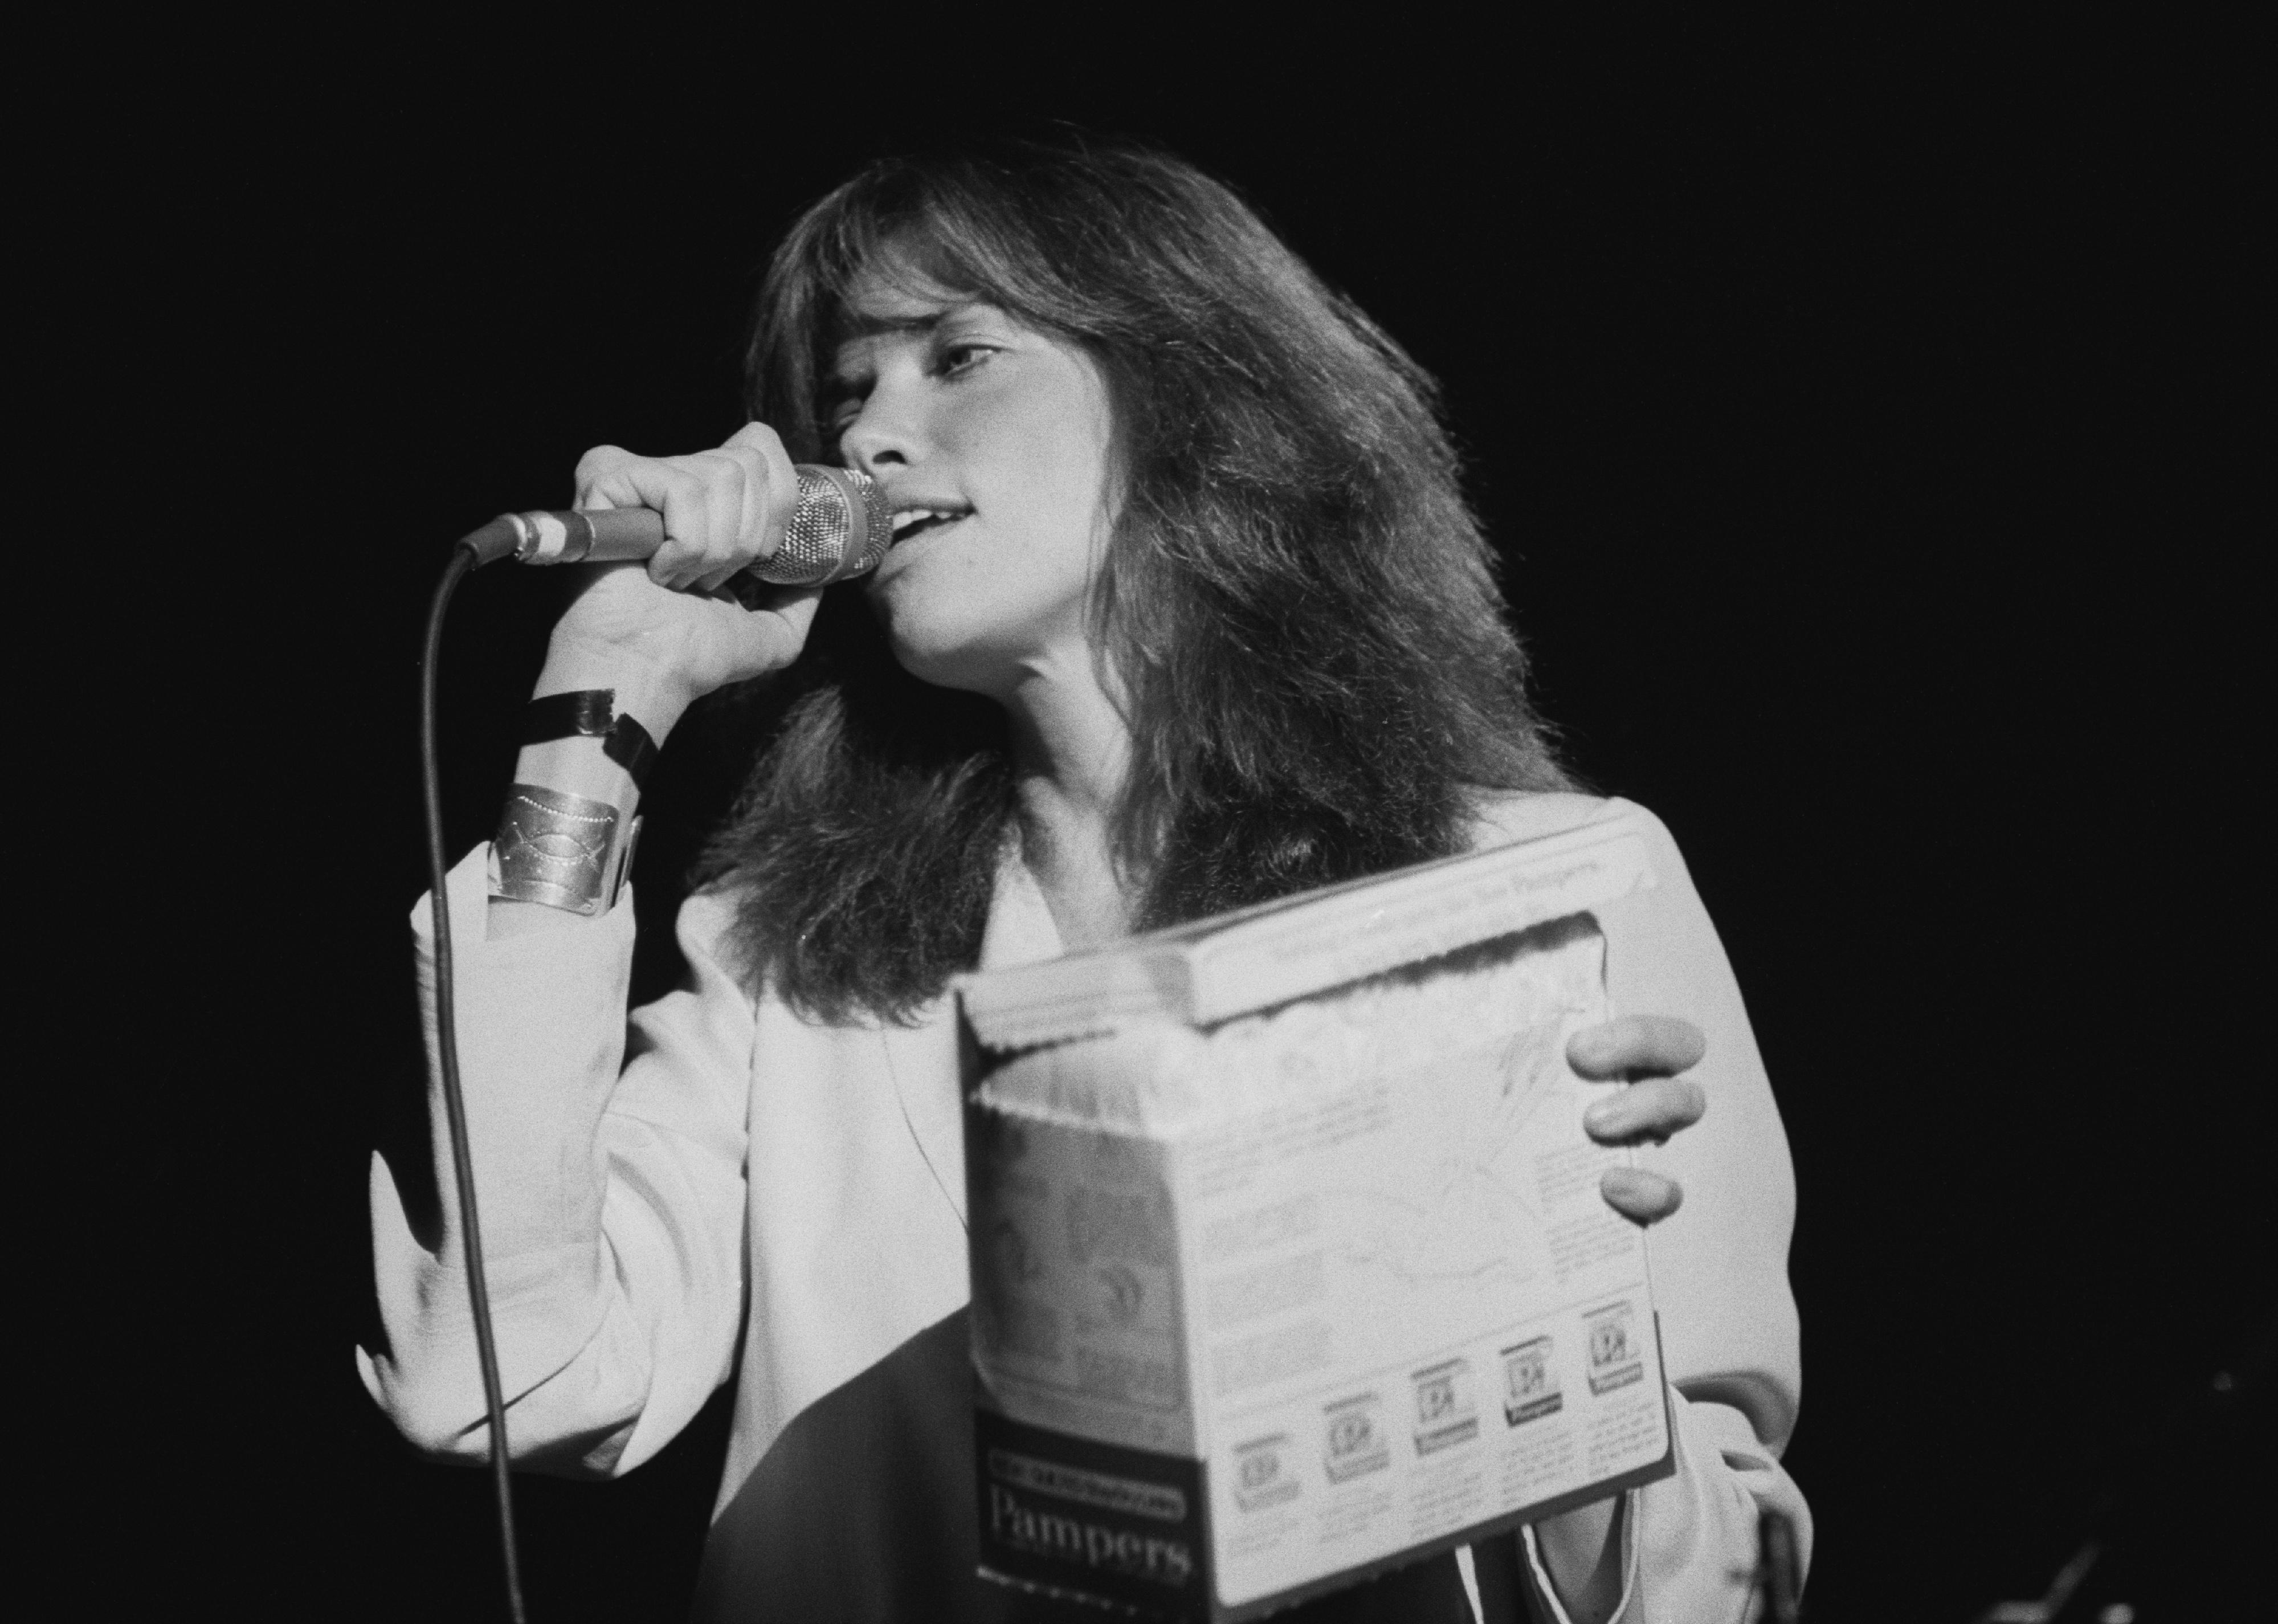 Carly Simon performing onstage holding a box of pampers.